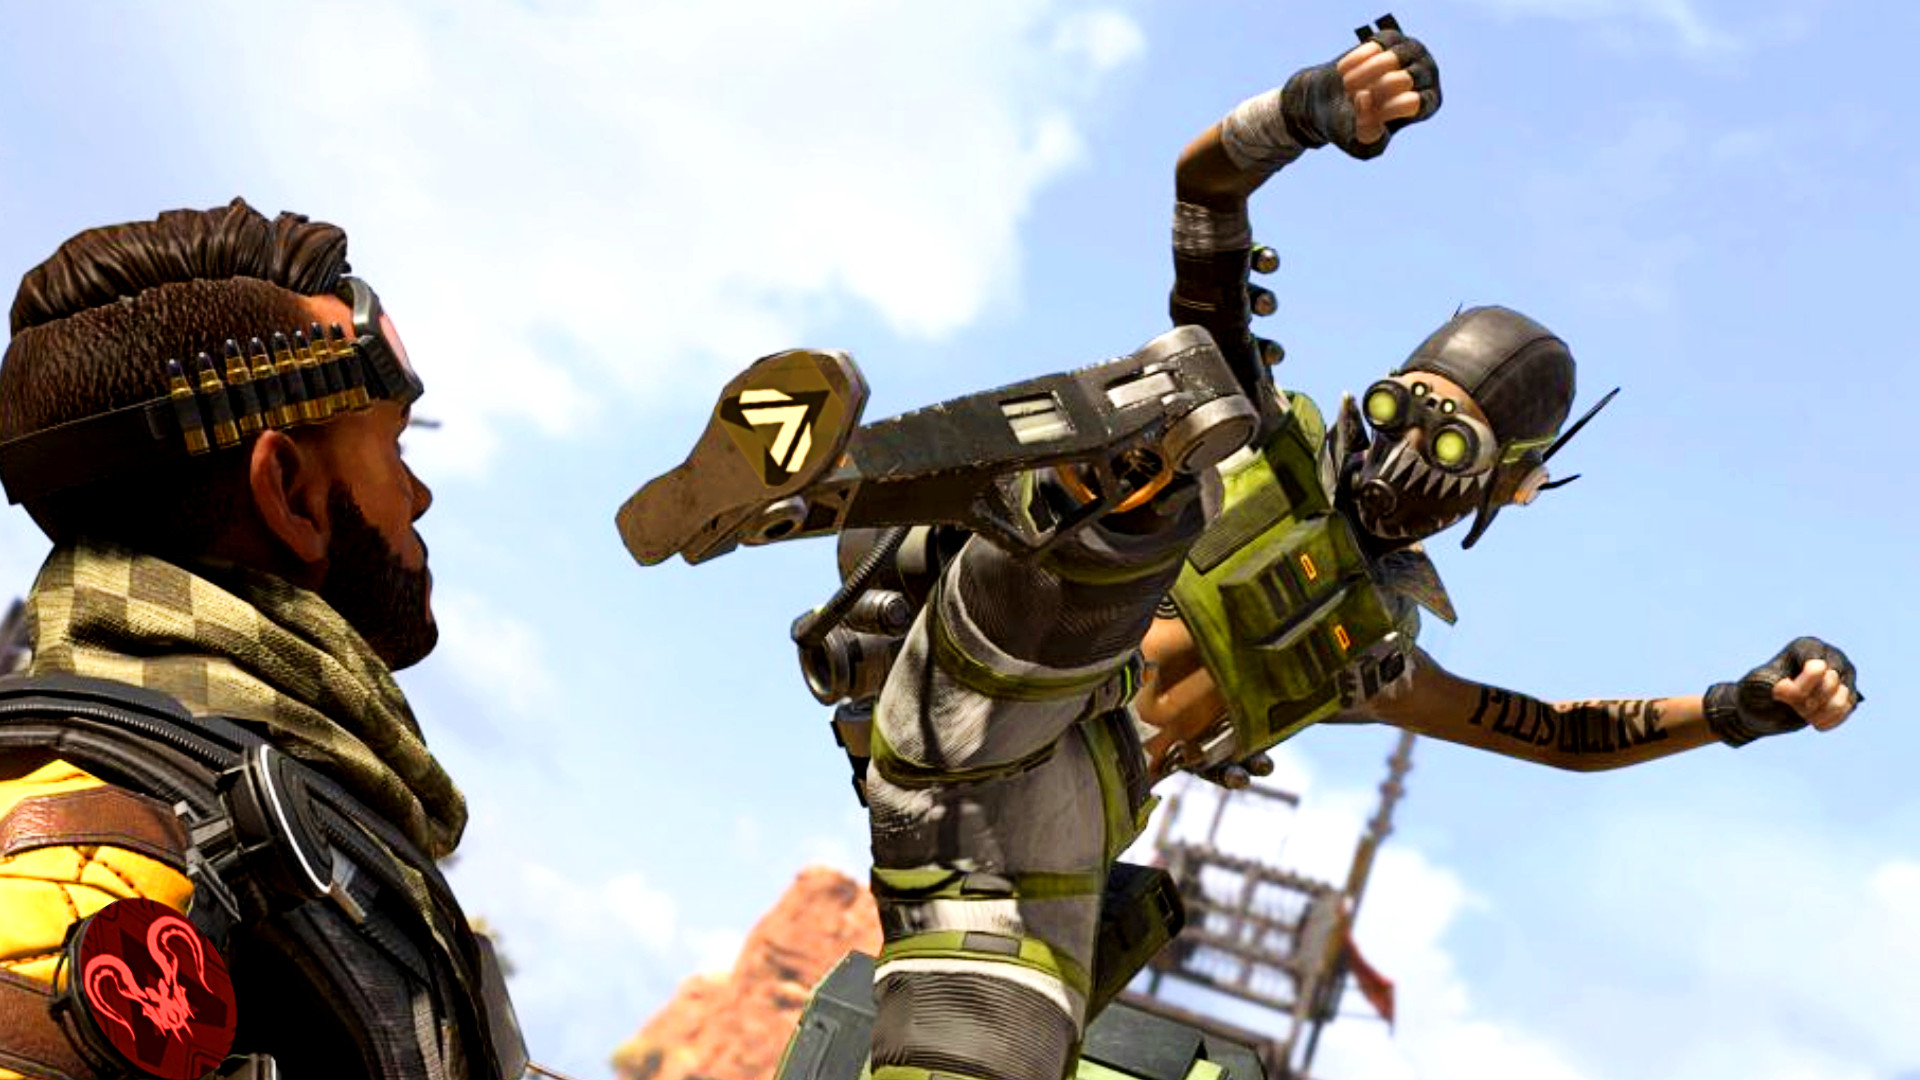 Apex Legends players turn to mob justice to resolve matchmaking woes